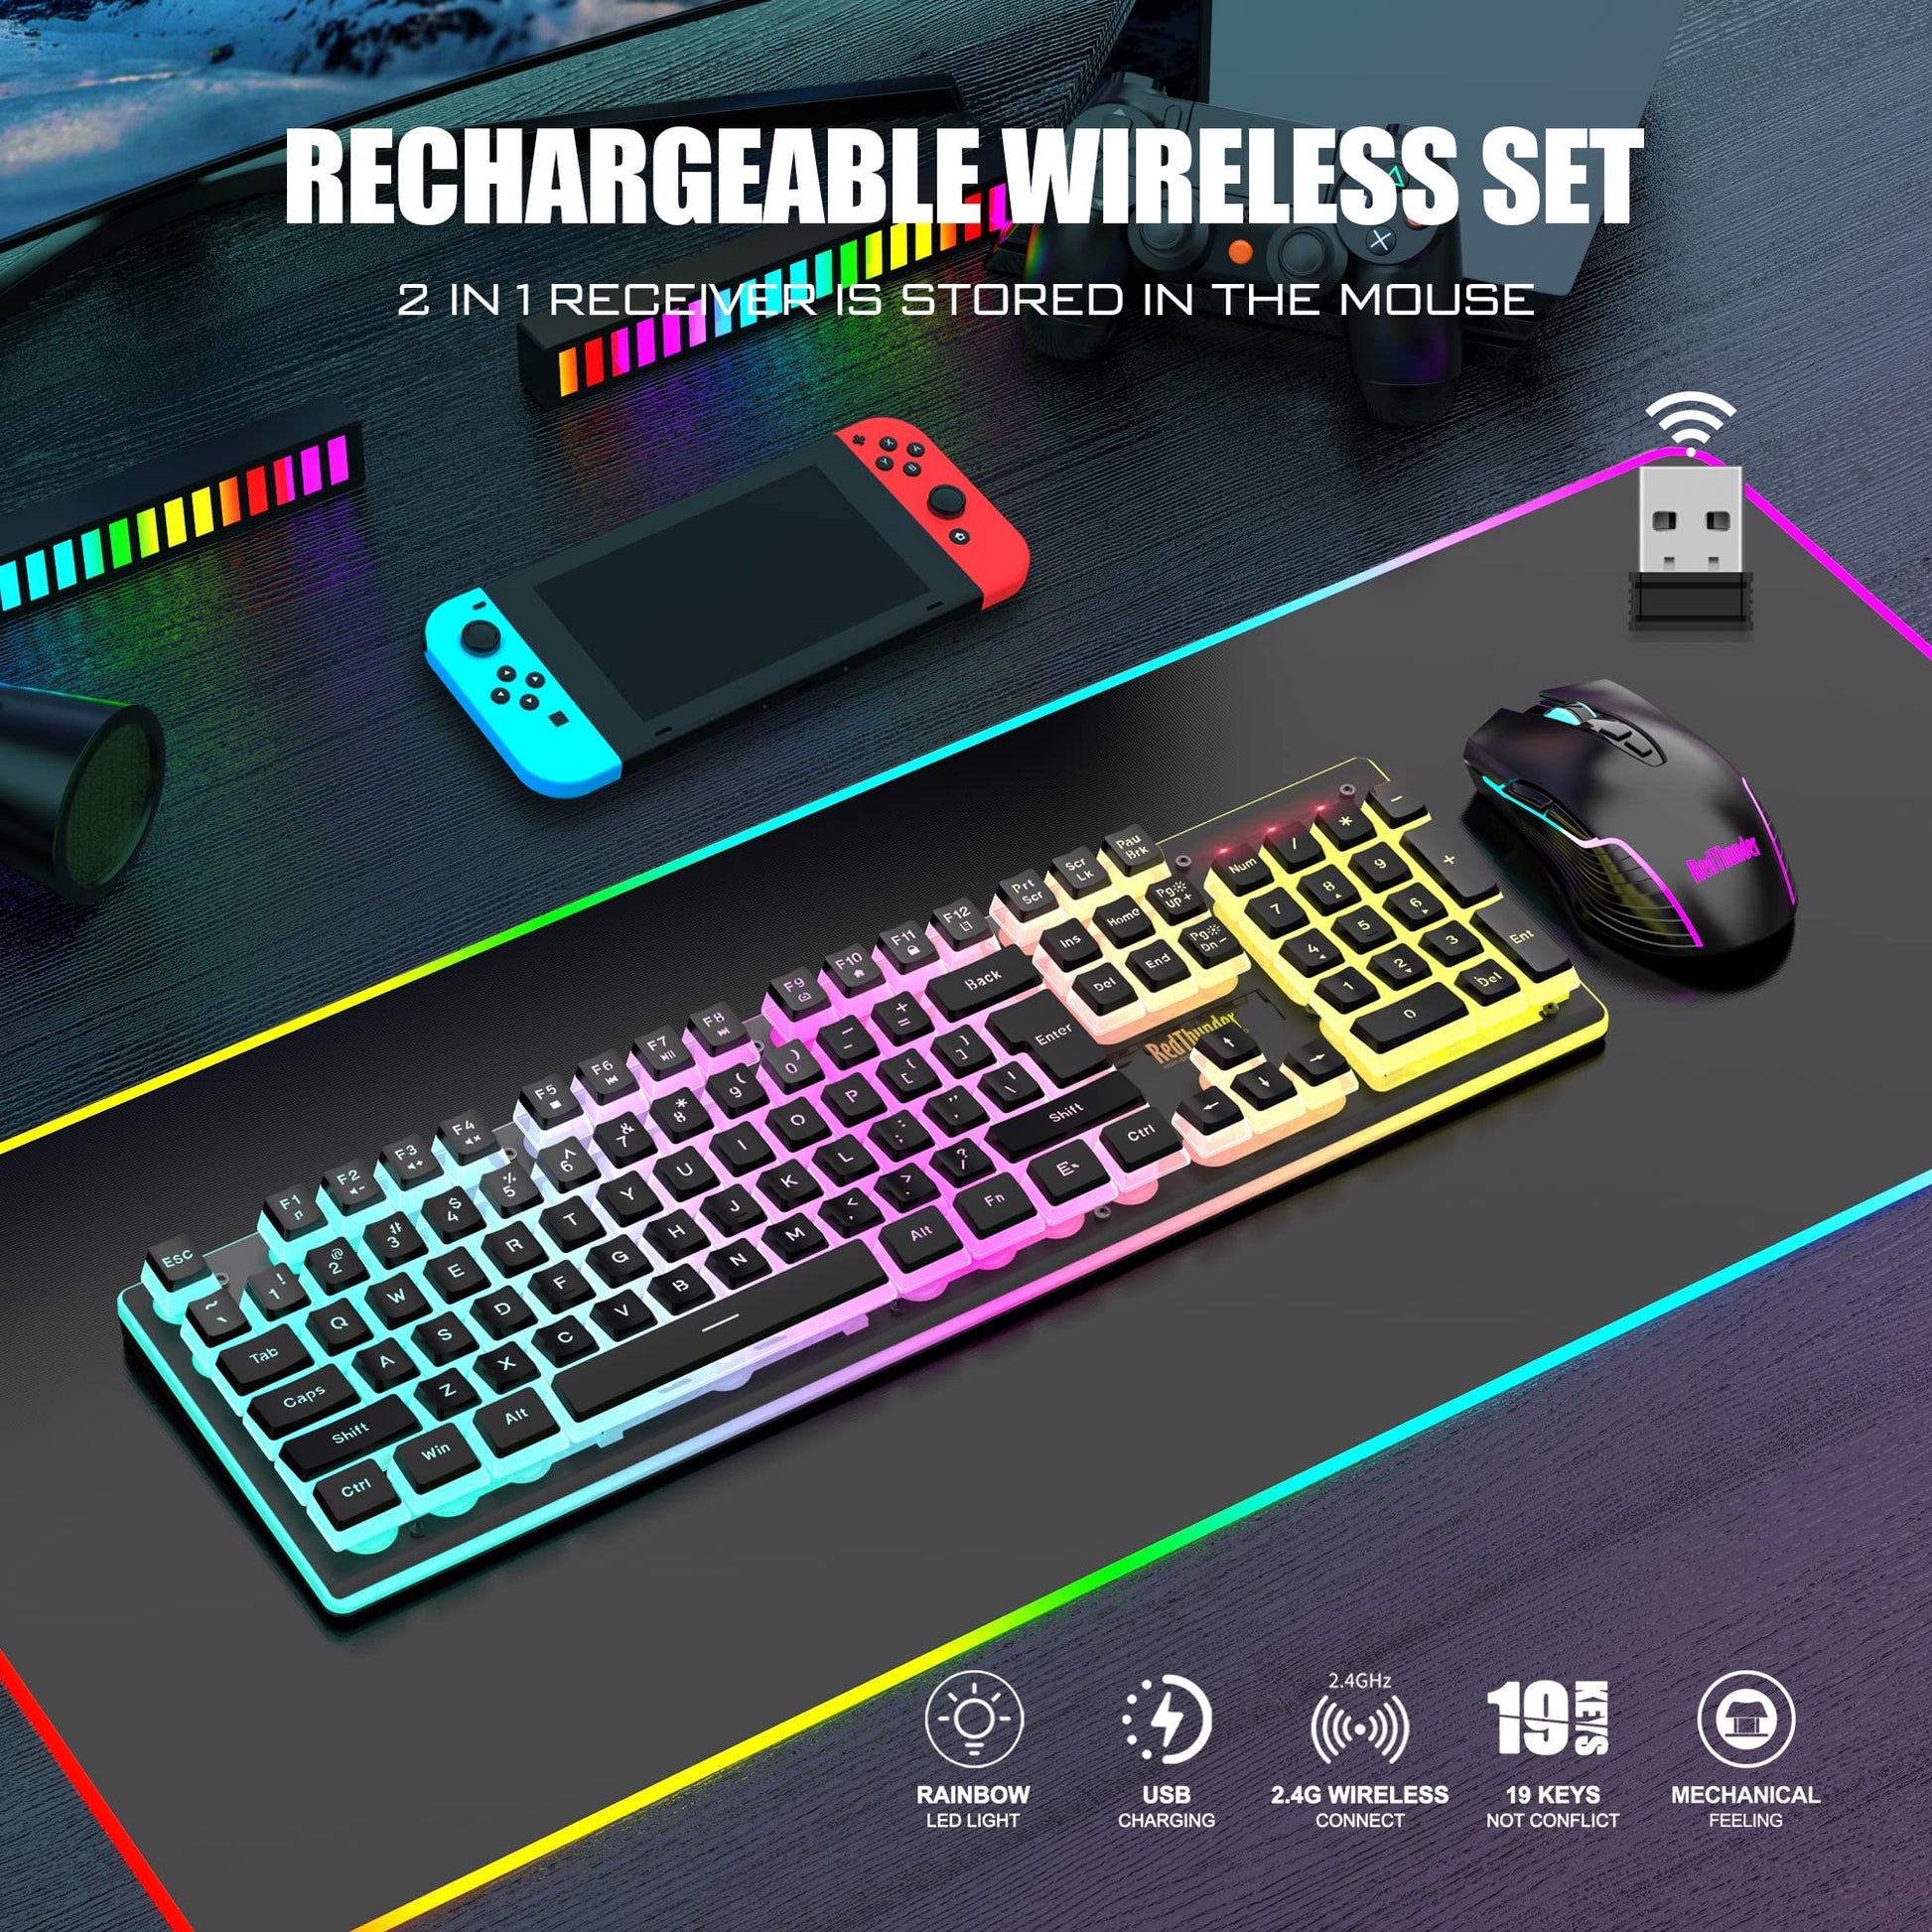 RedThunder K10 Wireless Gaming Keyboard and Mouse Combo, RGB Backlit Rechargeable 3800mAh Battery, Mechanical Feel Anti-ghosting Keyboard with Pudding Keycaps + 7D 3200DPI Mice for PC Gamer (Black) - amzGamess